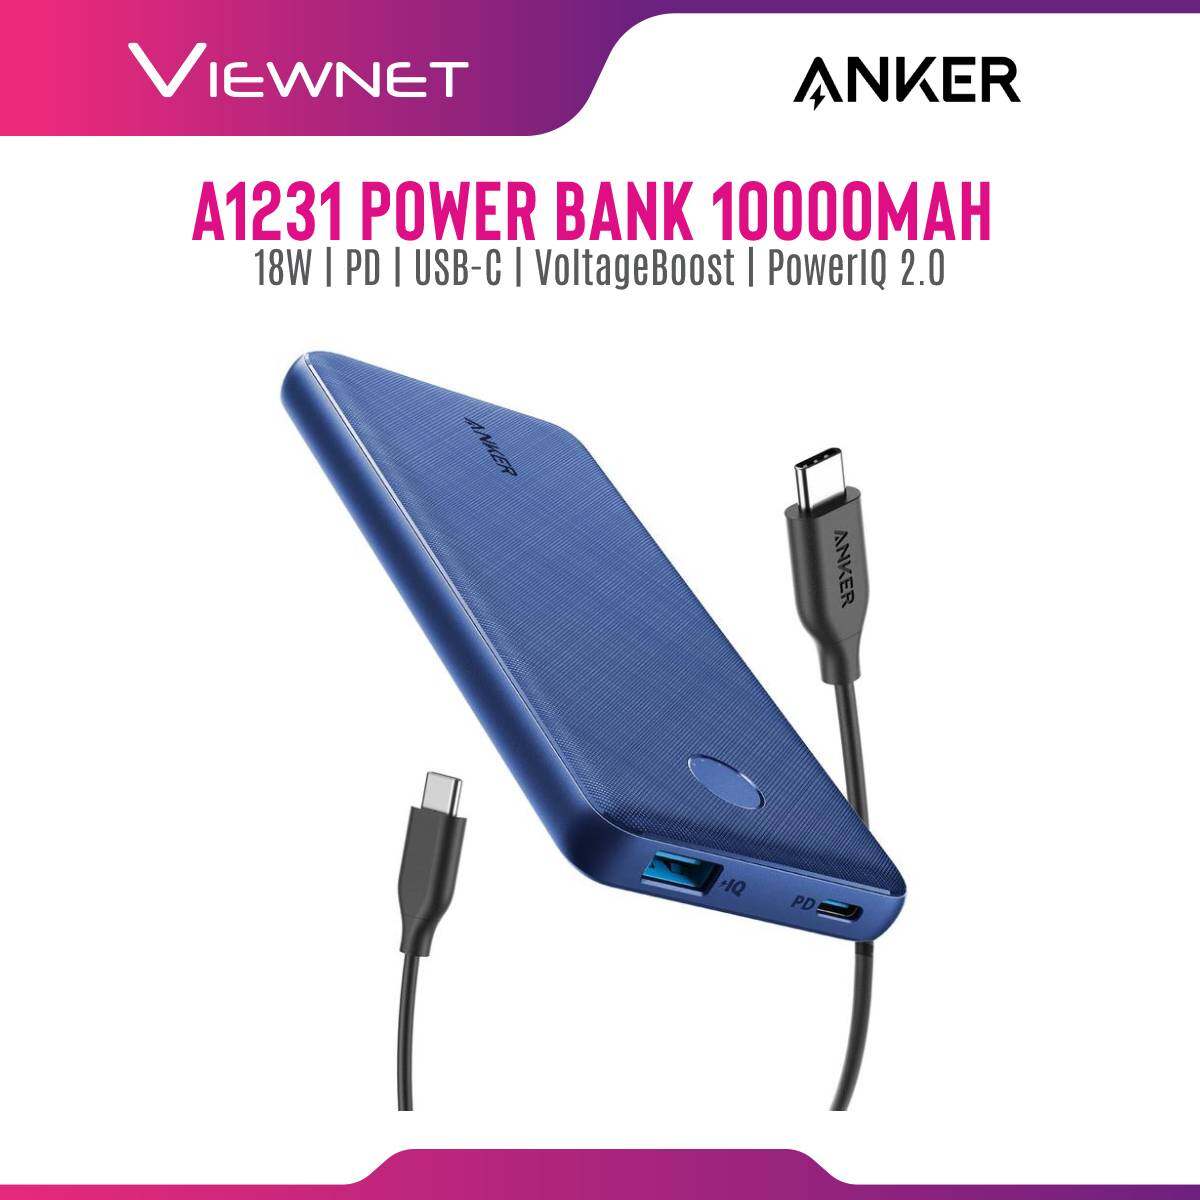 Anker A1231 PowerCore Slim 10000 Portable Charger USB-C Power Delivery (10000mAh/18W)